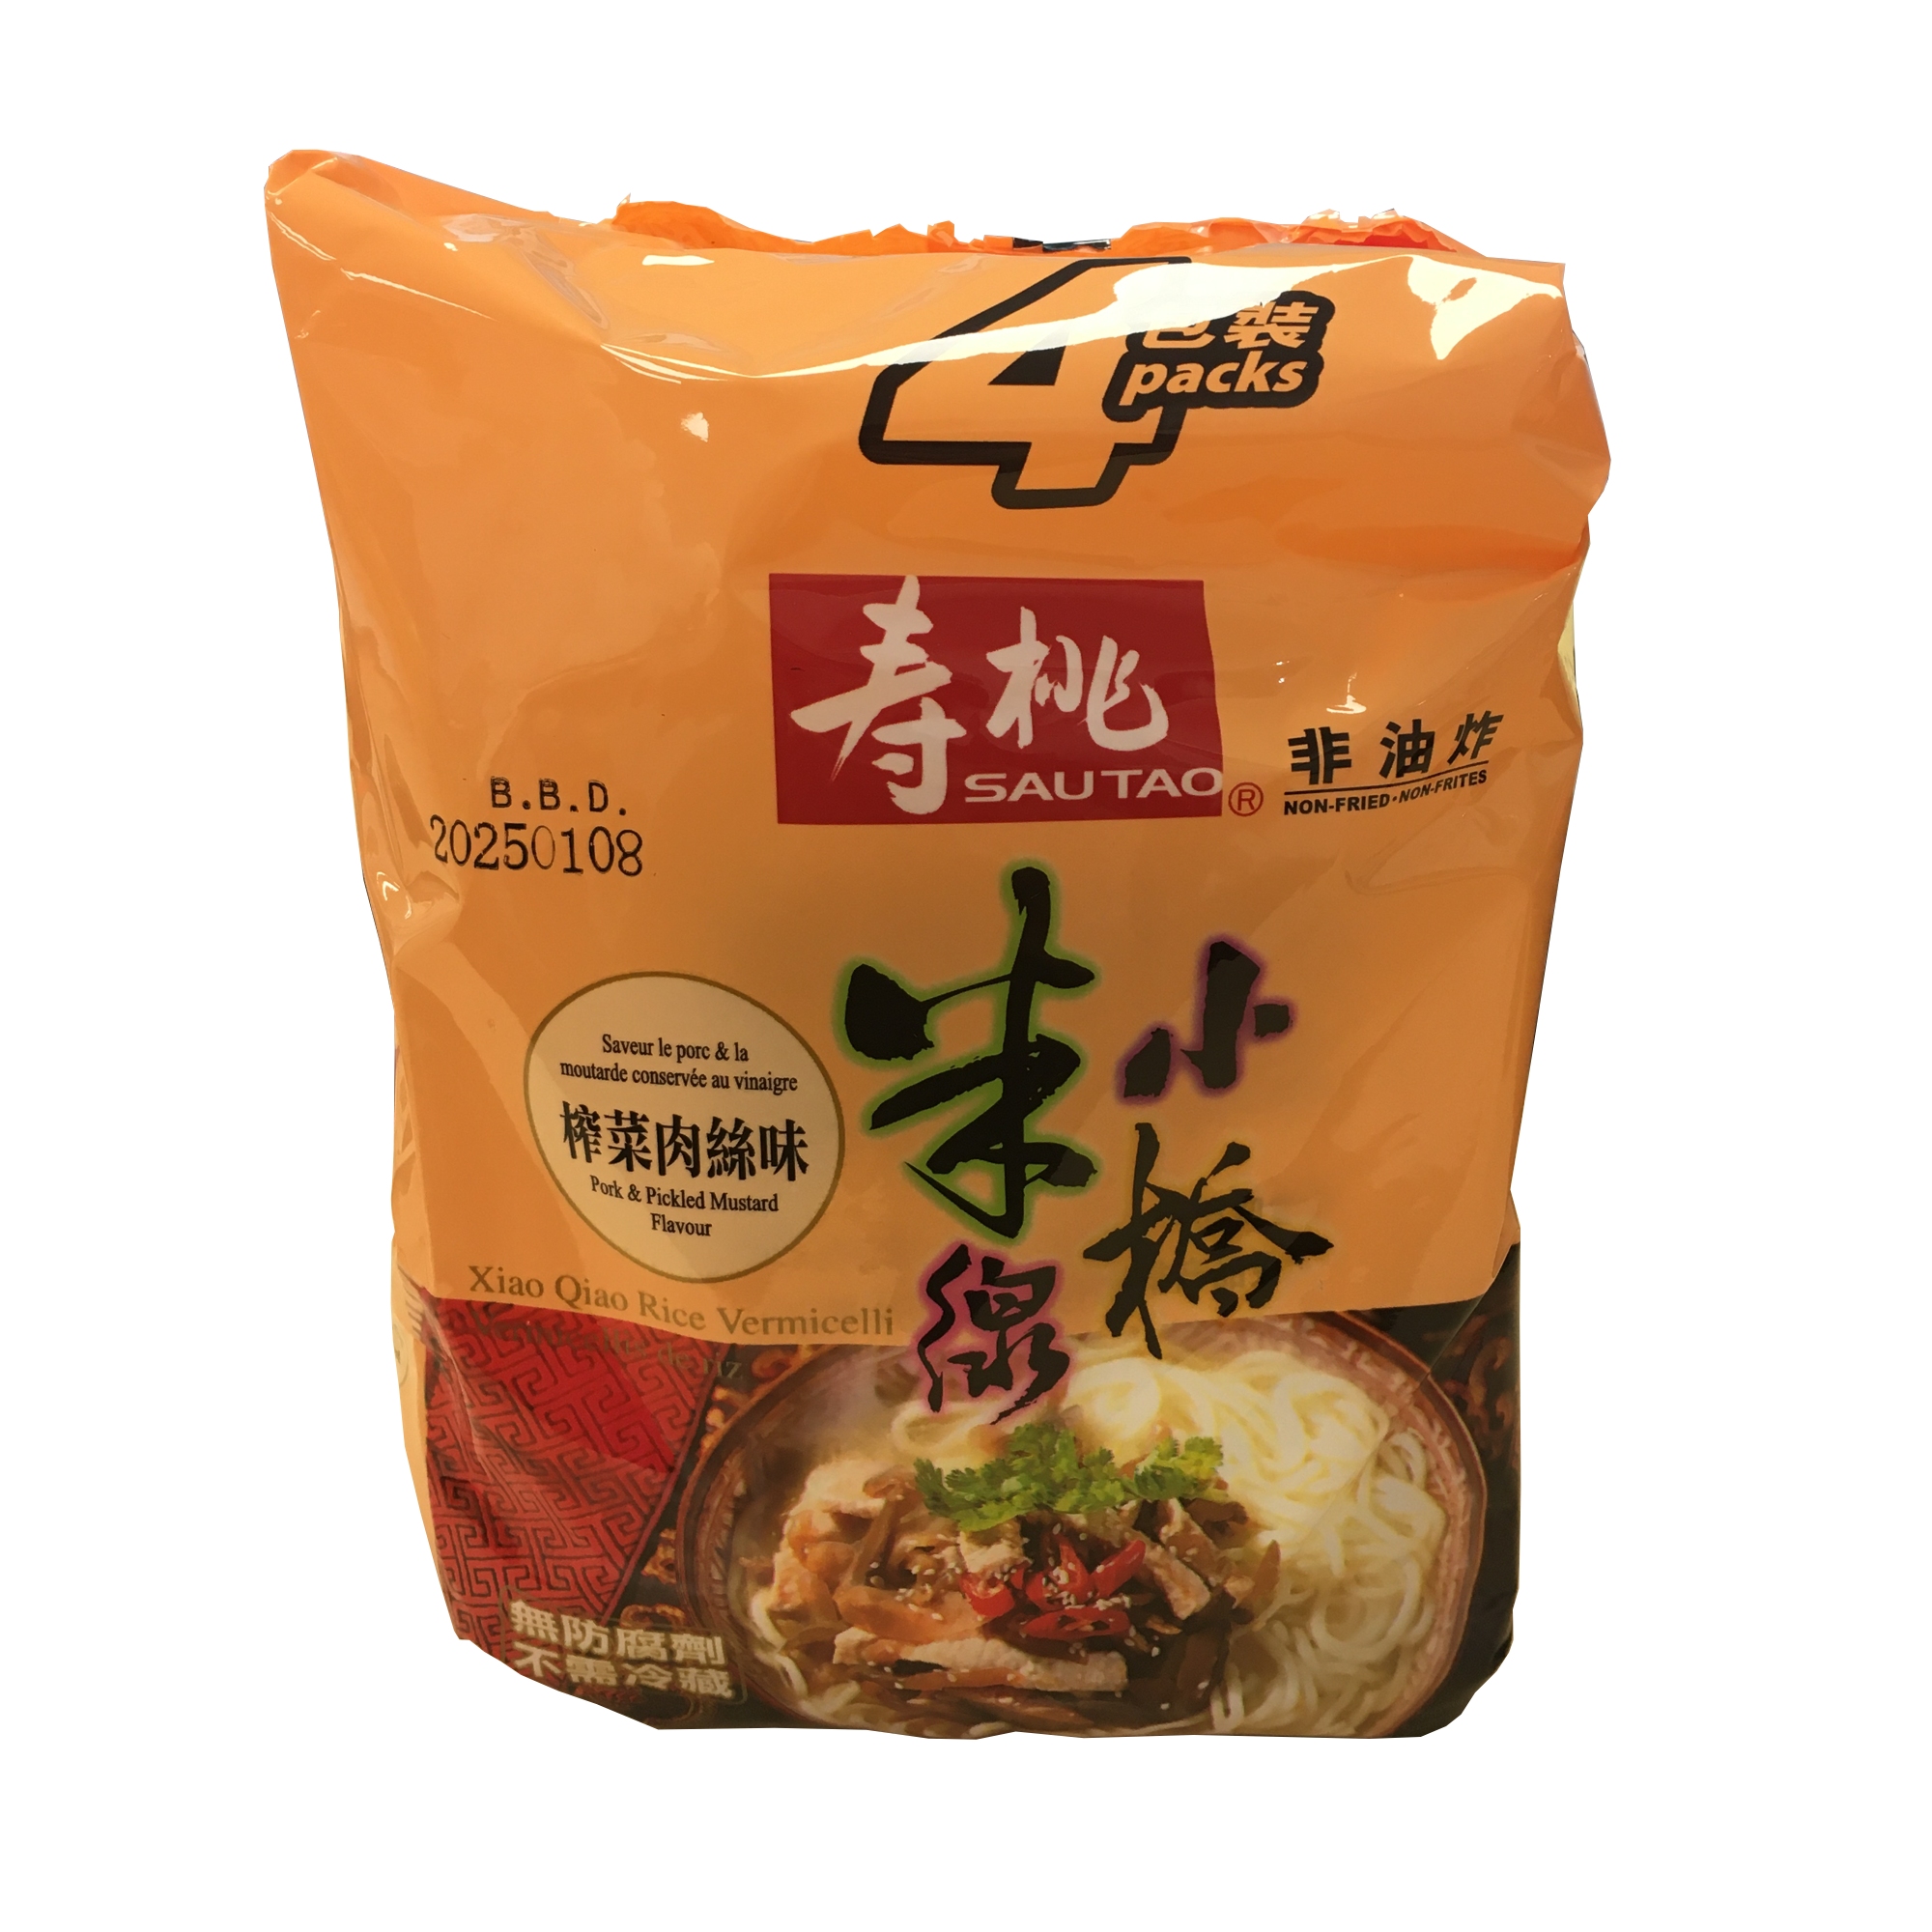 ST 4-PK XIAO QIAO RICE VERMICELLI PORK & PICKLED MUSTARD ND137063